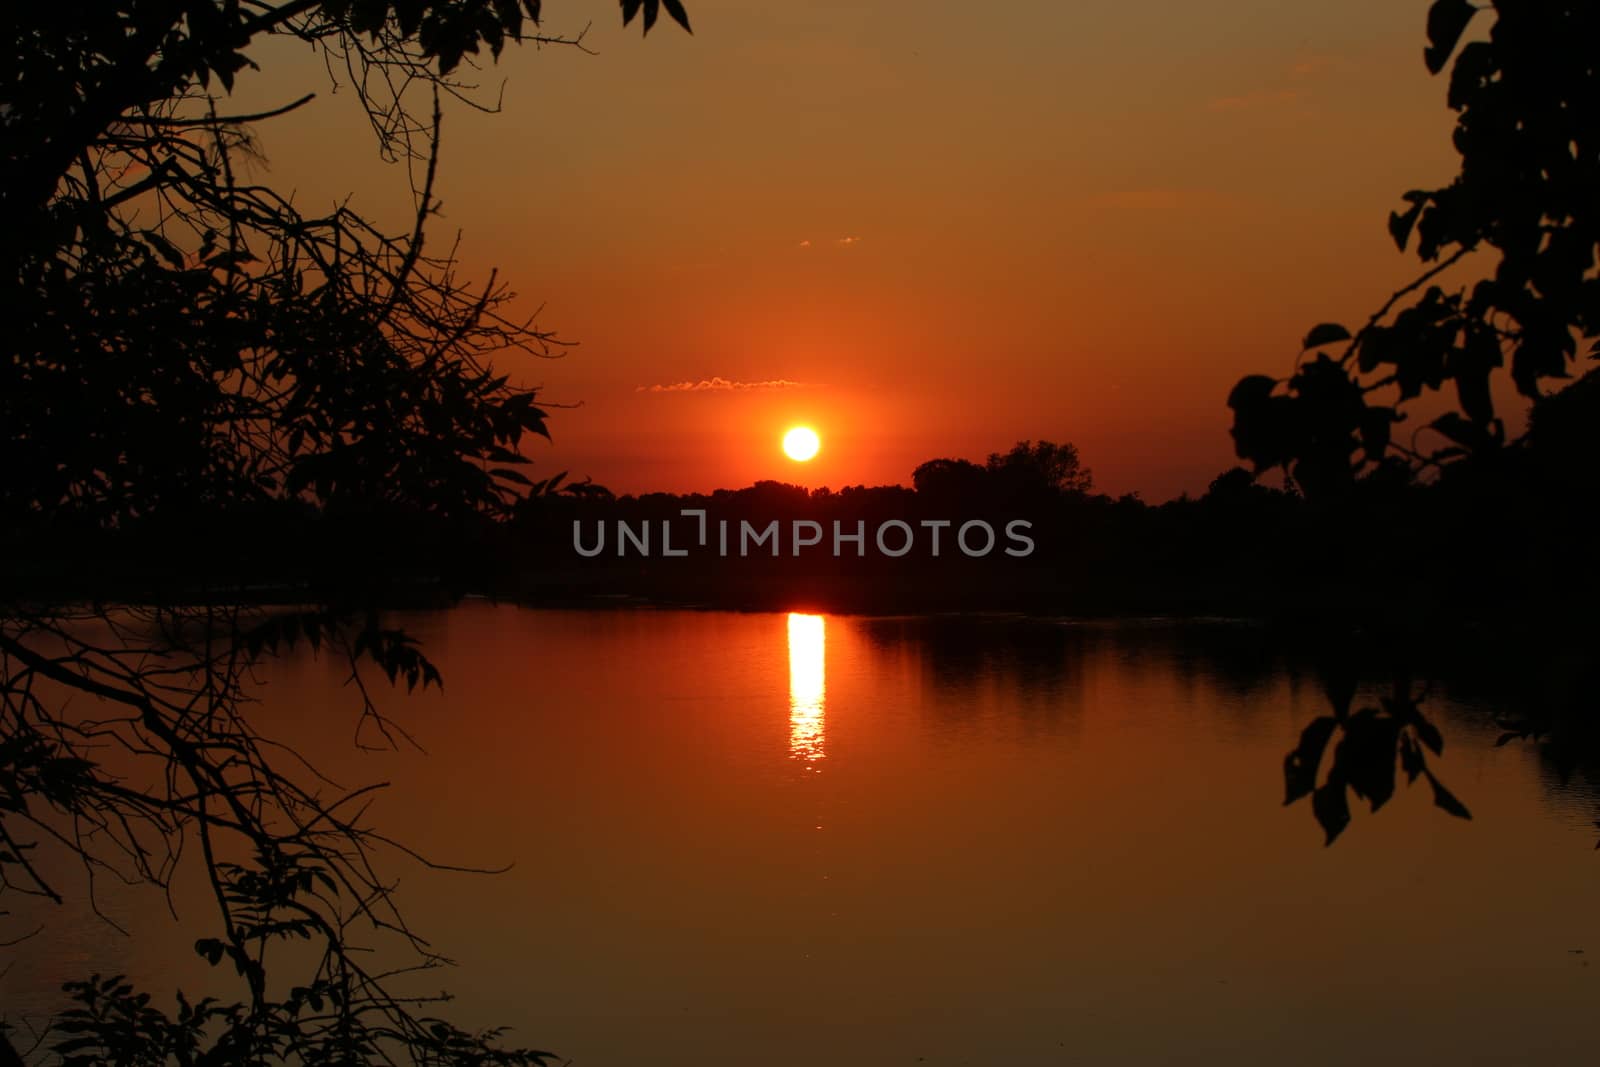 A great sunset with a lake view and bushes in the foreground